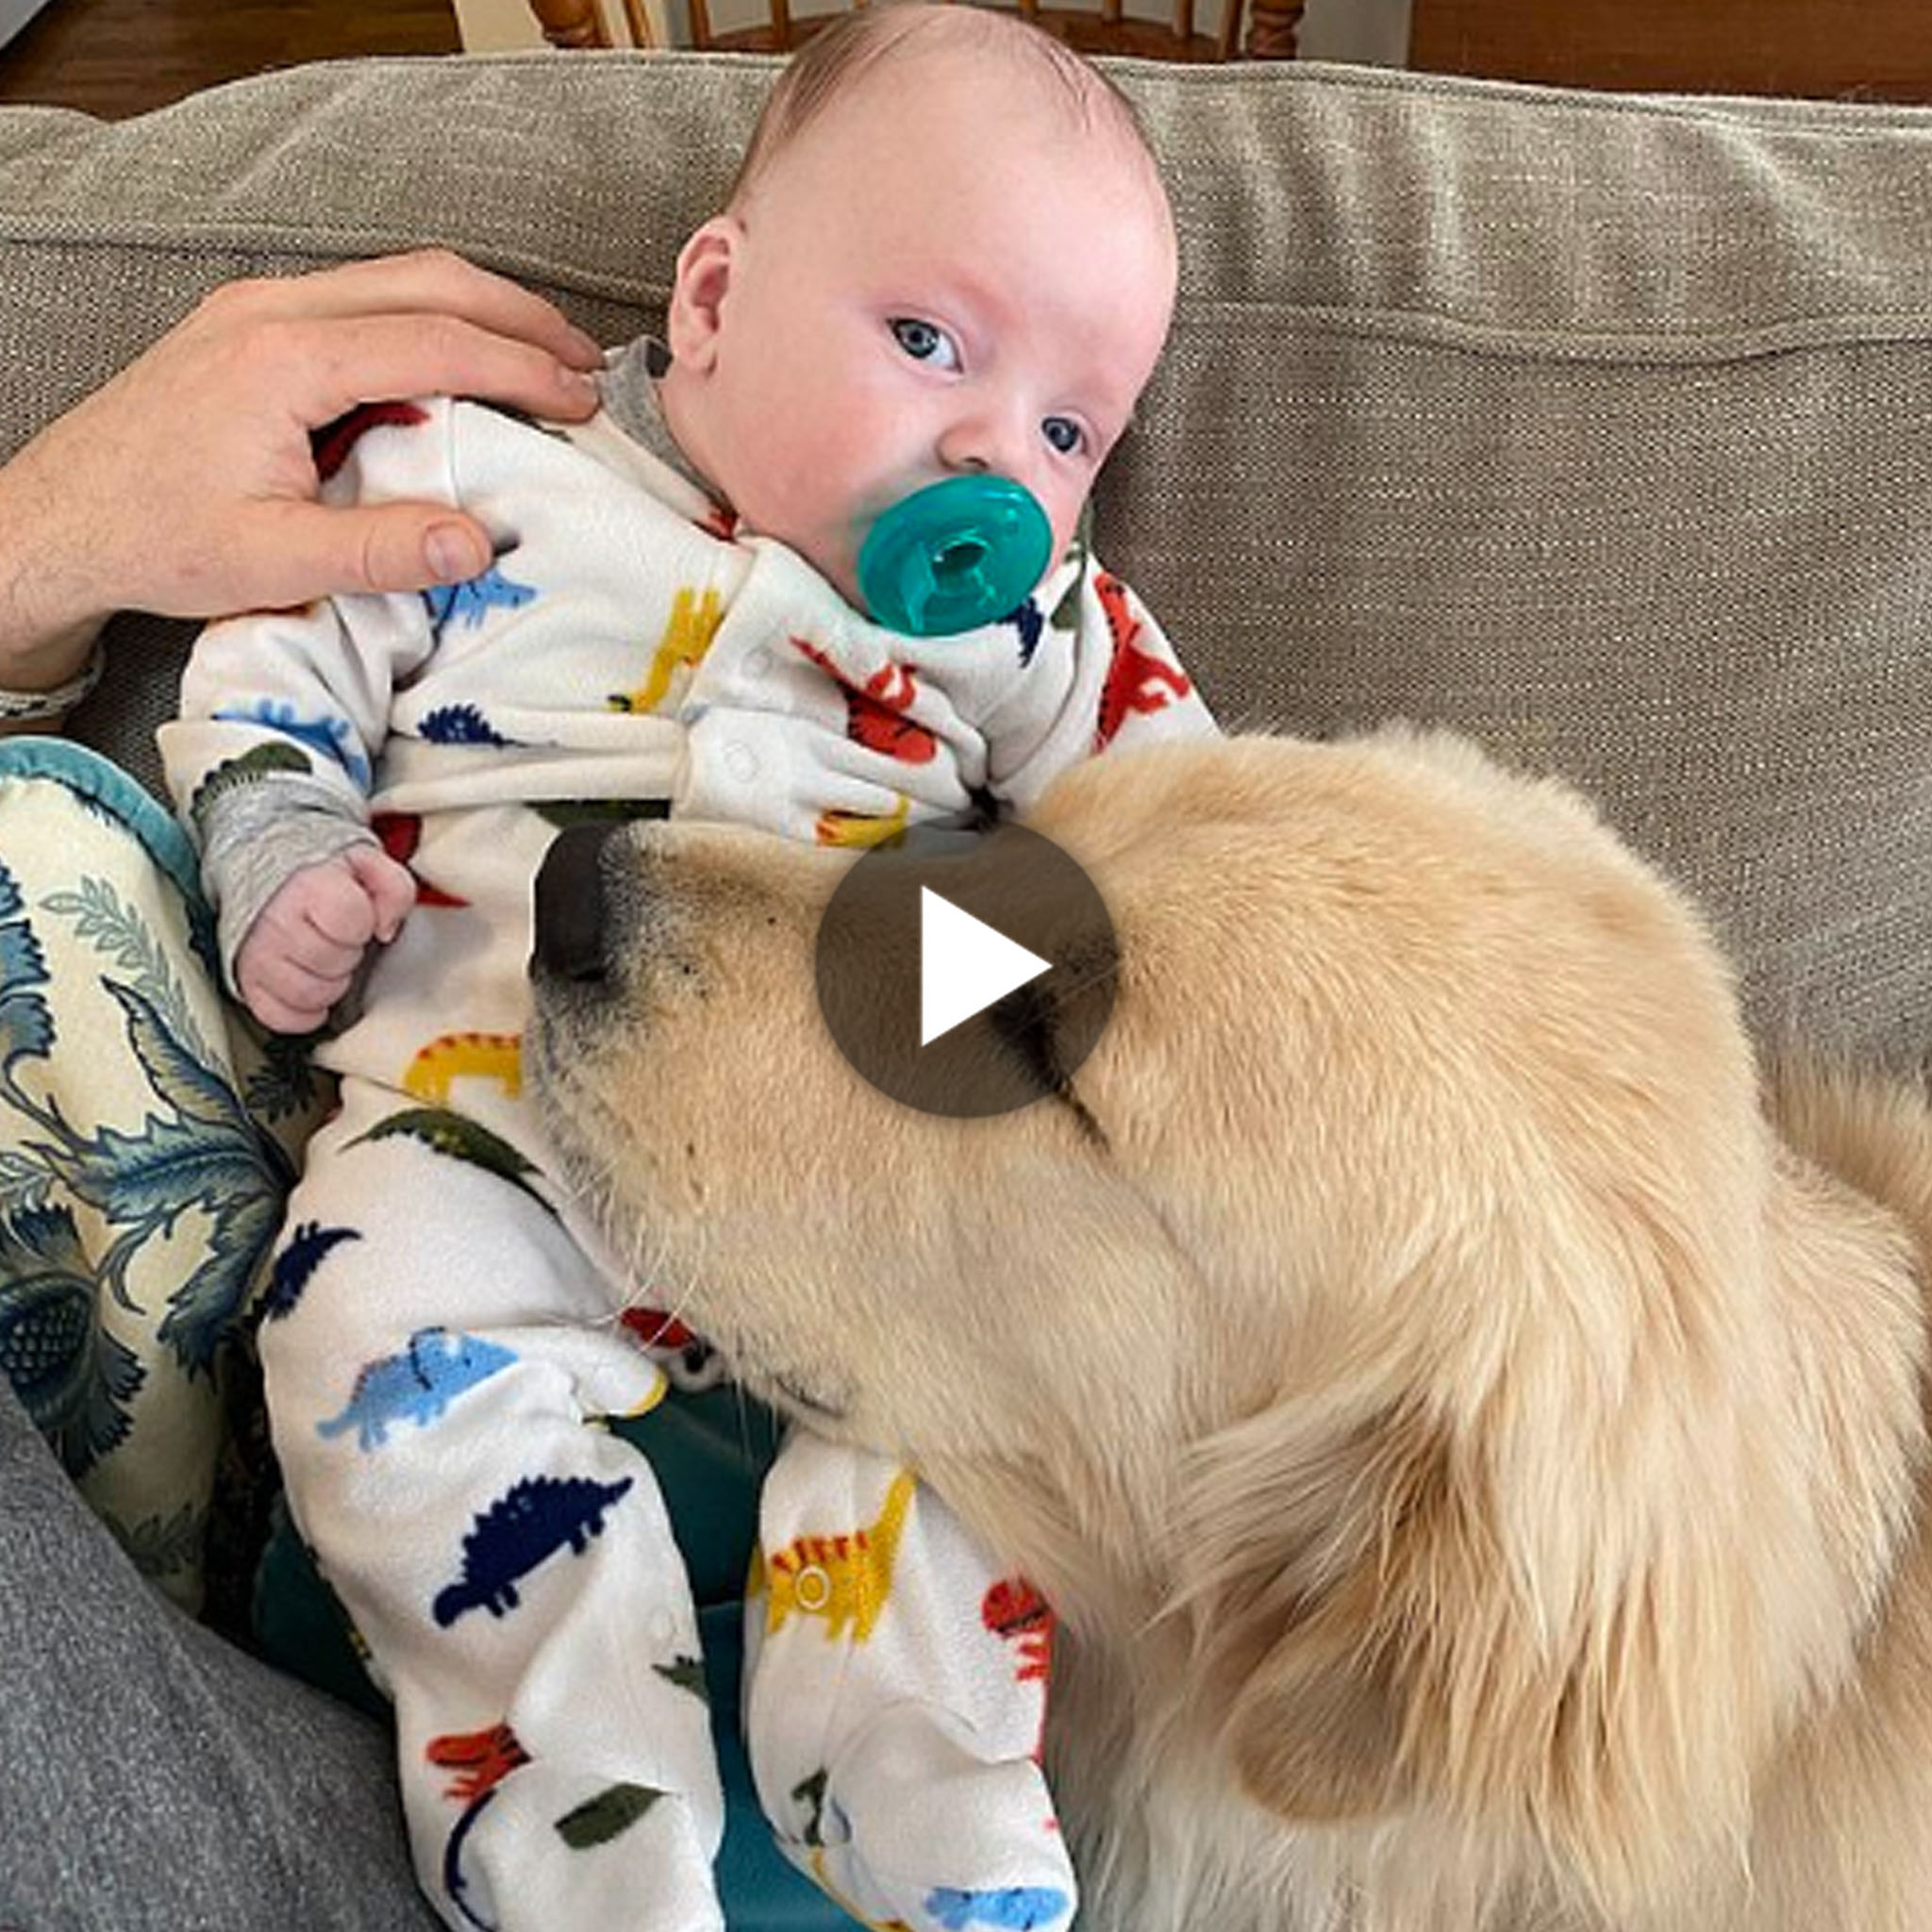 tho “An endearing video captures the heartwarming bond between a dog and his human baby brother, showcasing their adorable friendship.” tho